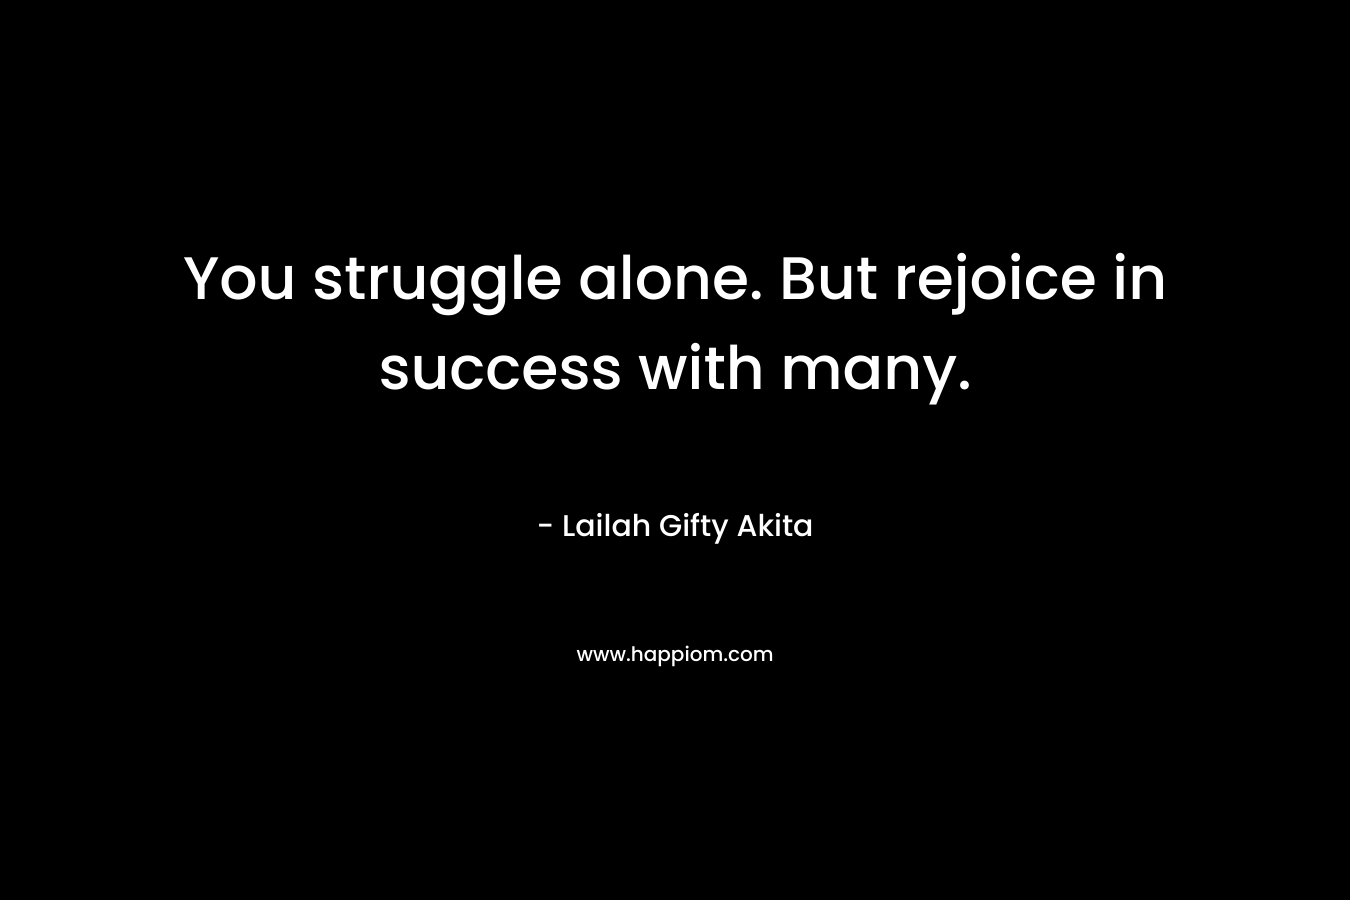 You struggle alone. But rejoice in success with many. – Lailah Gifty Akita